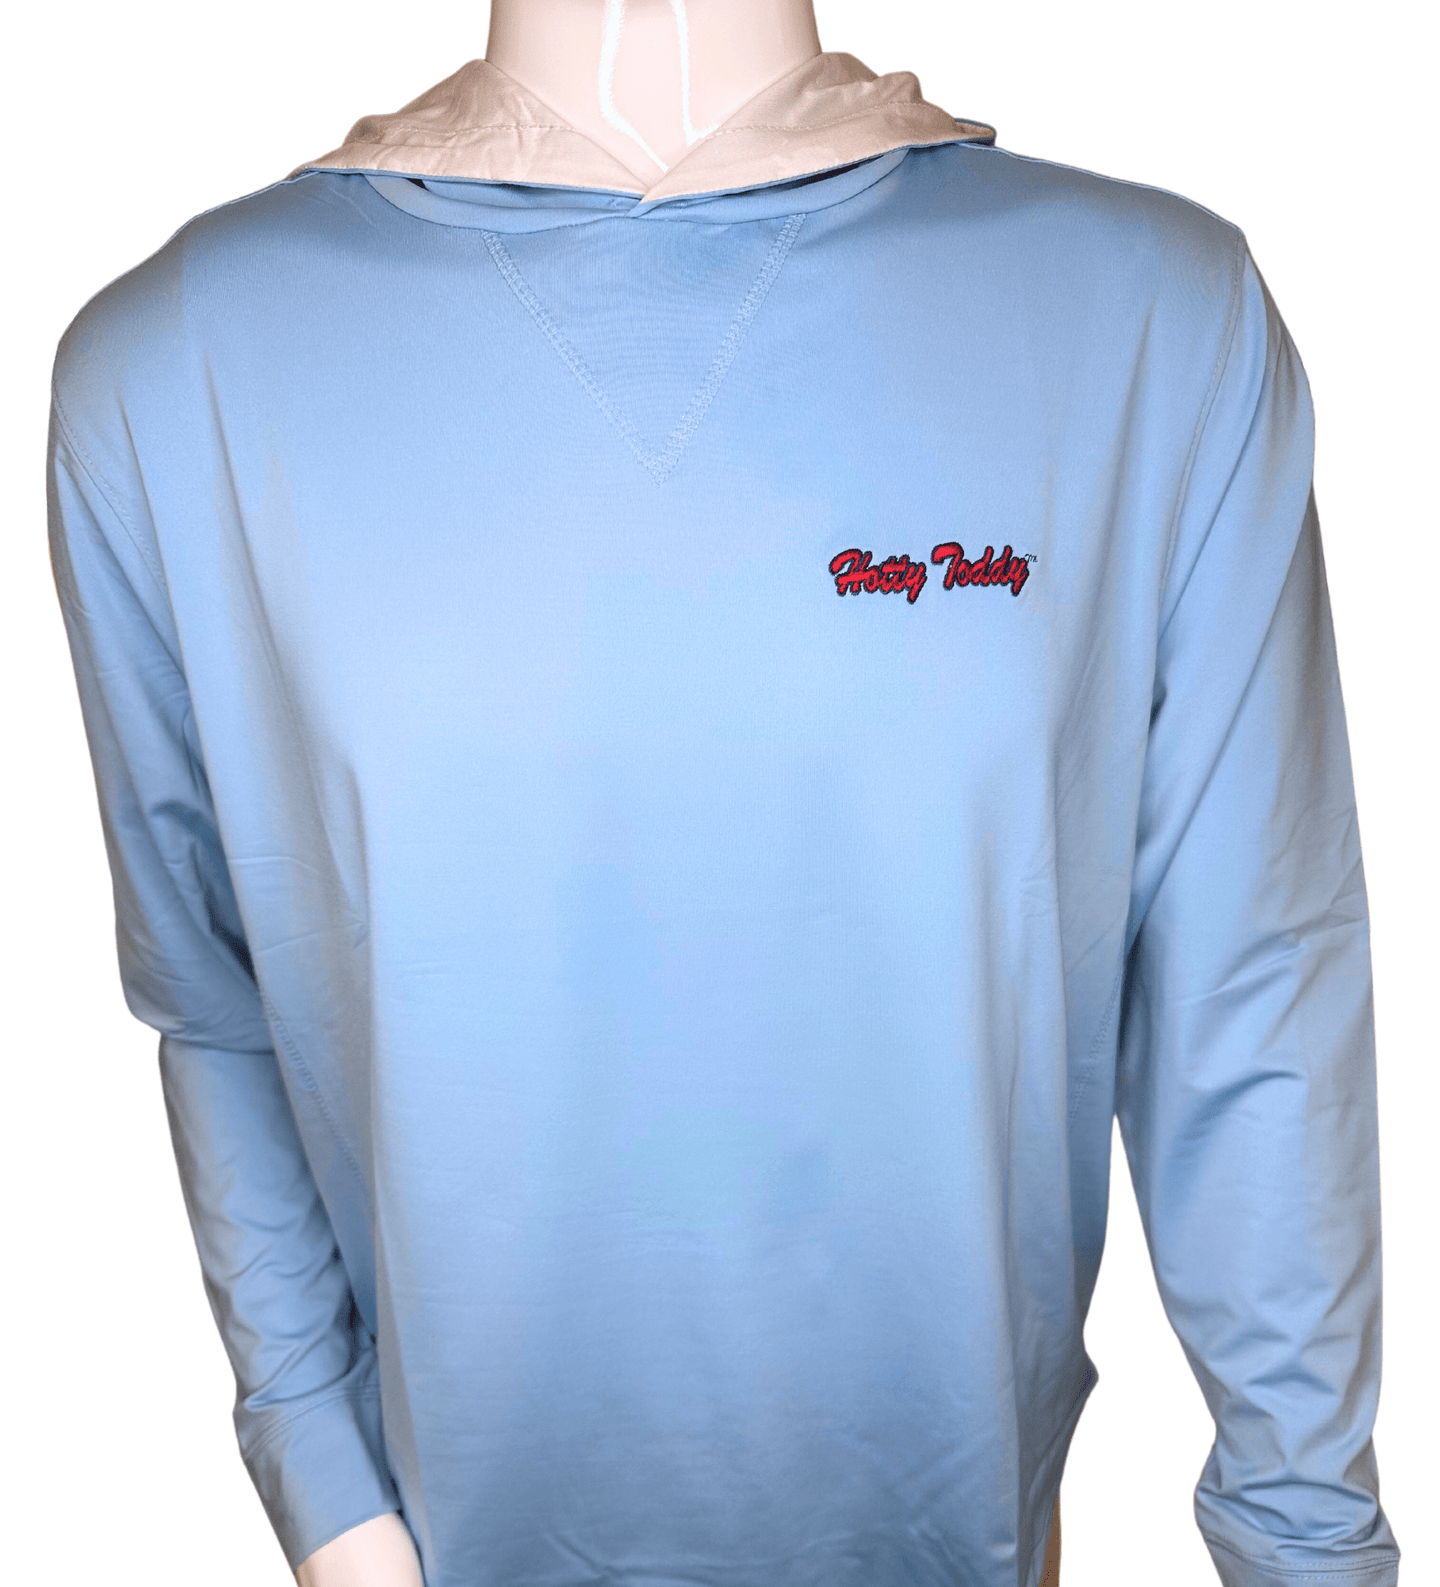 HORN LEGEND GAMEDAY - UNIVERSITY OF MISSISSIPPI - OXFORD - HOODIES SERENITY / S HOTTY TODDY CAMO TRIM HOODIE